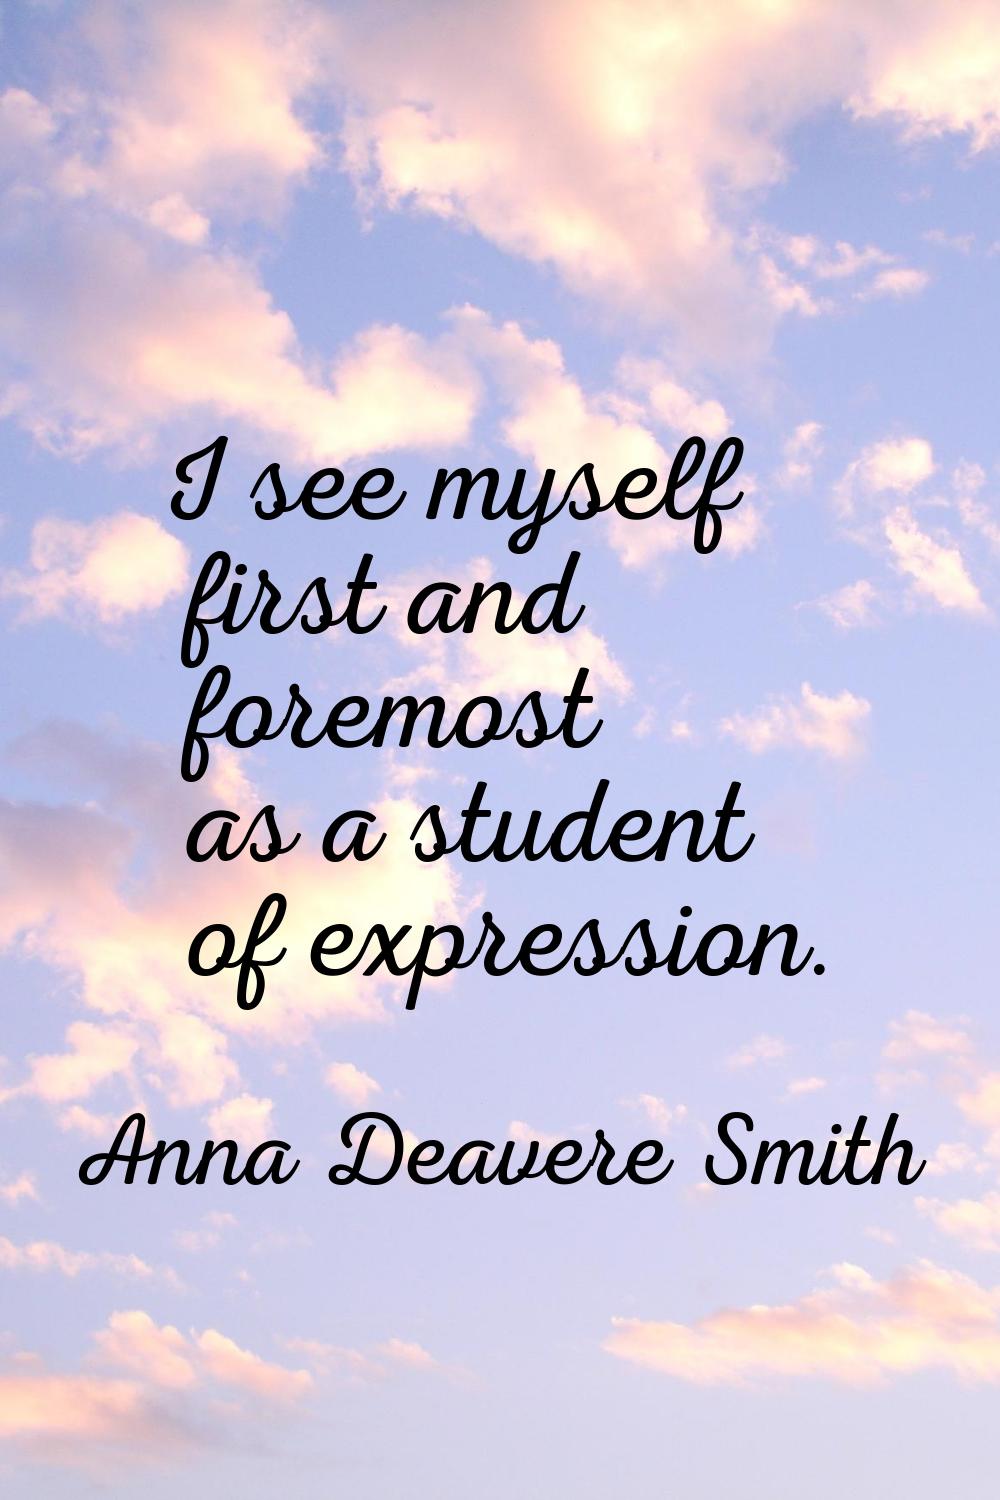 I see myself first and foremost as a student of expression.